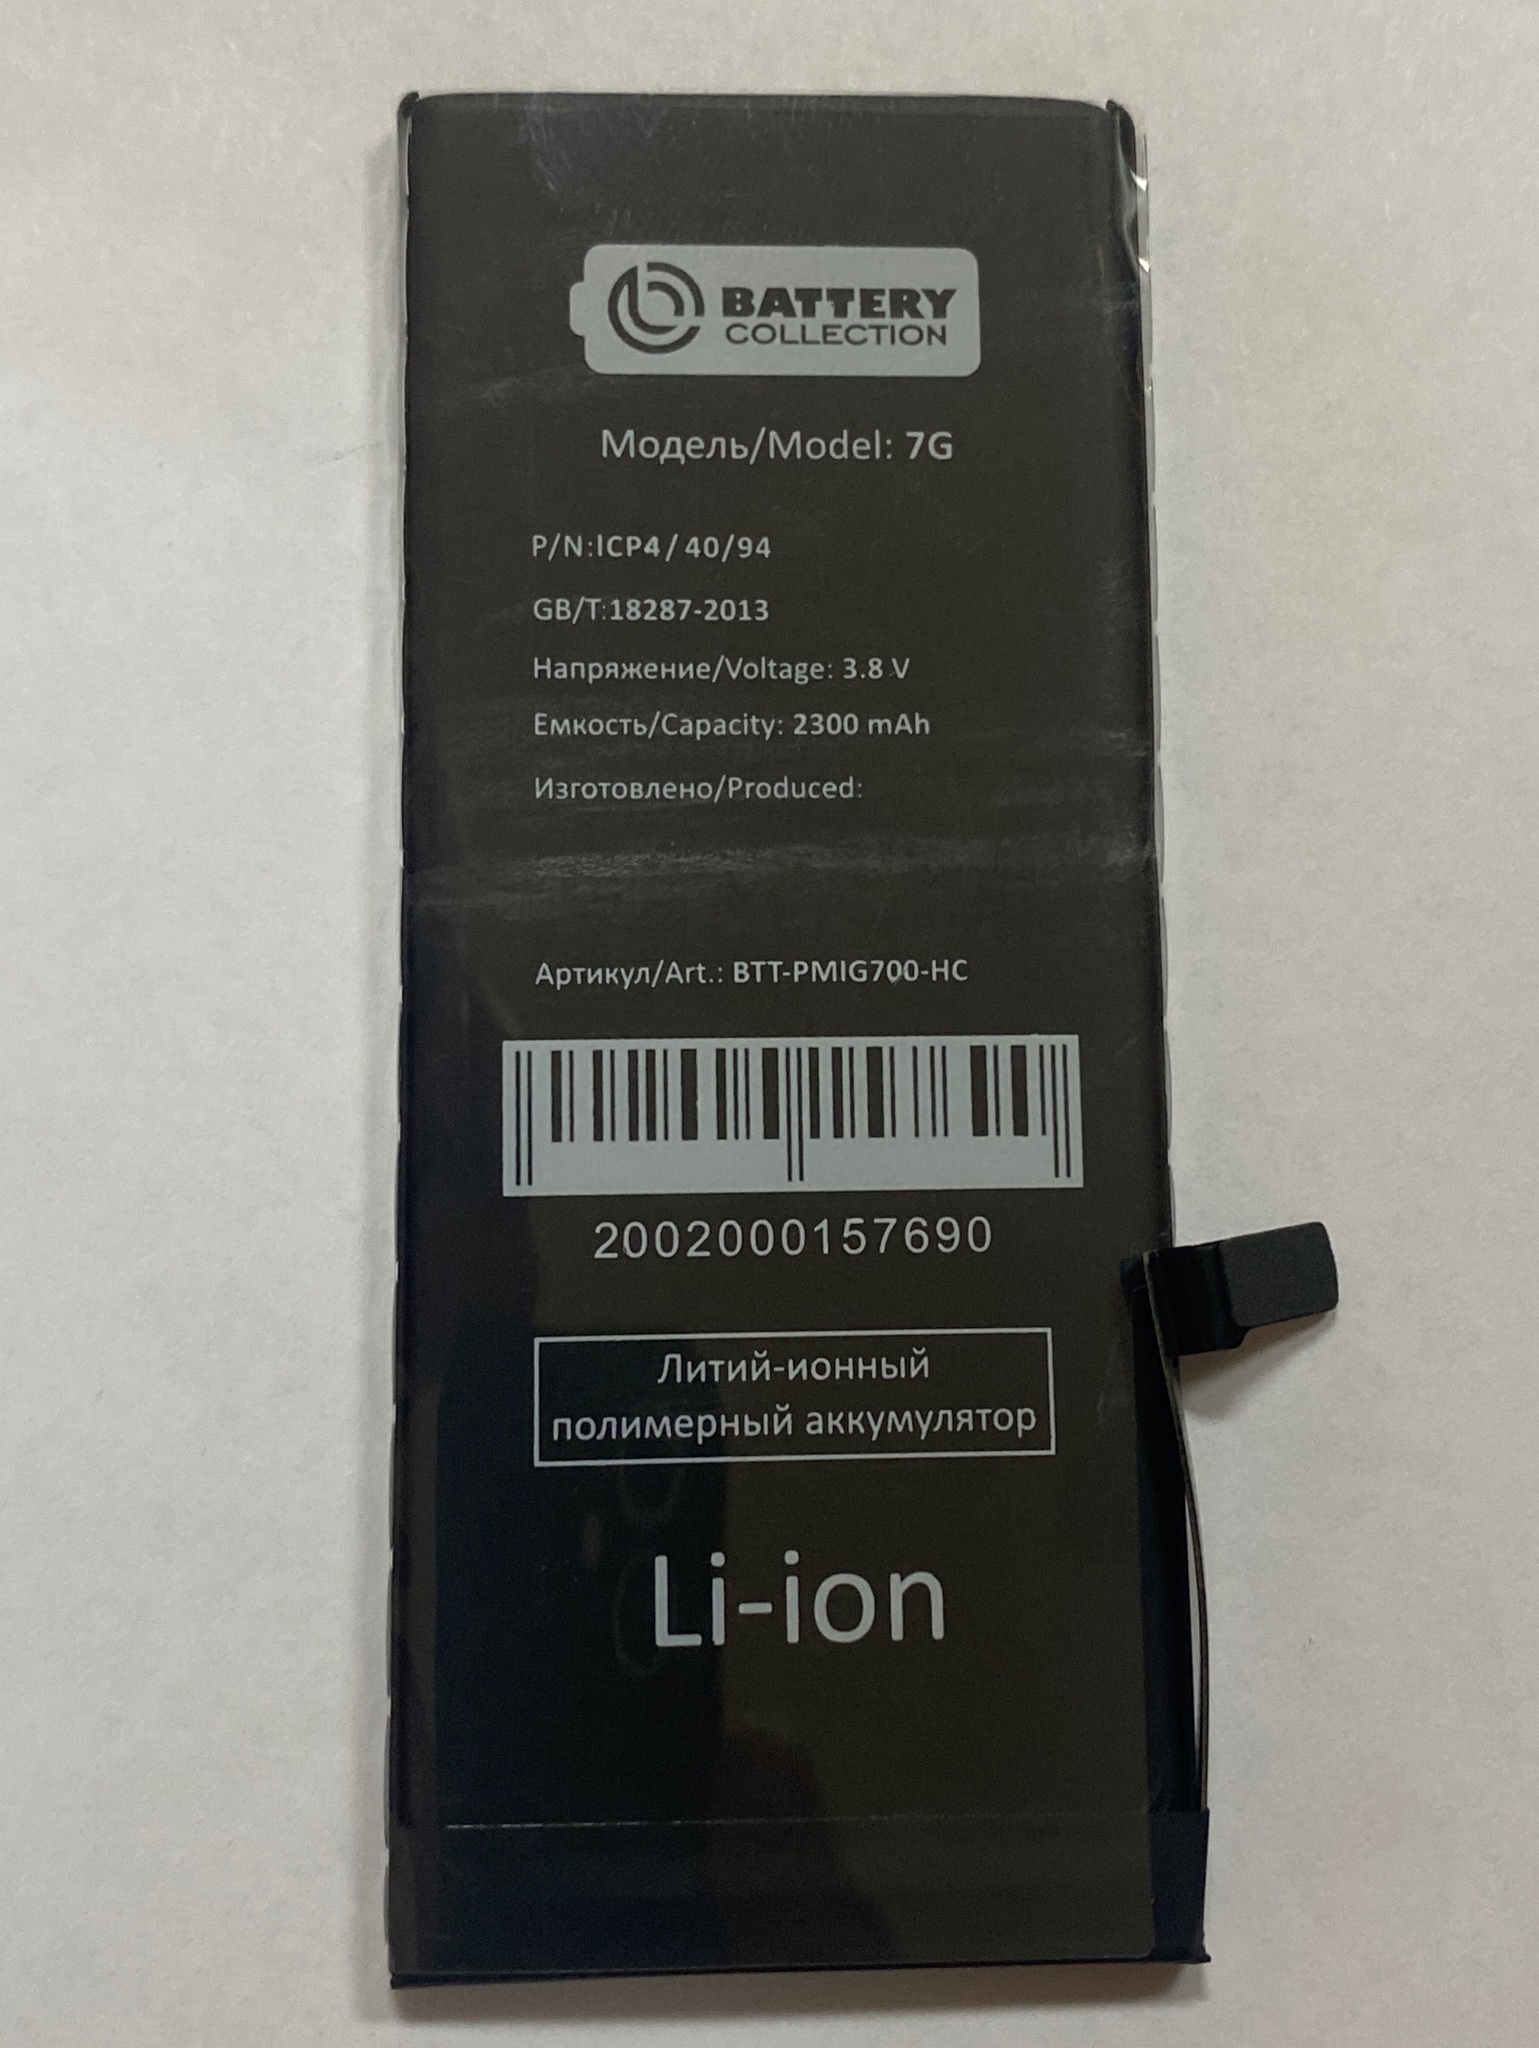 Аккумулятор для Apple iphone 6 Plus - Battery collection. Battery collection (премиум). Аккумулятор для Apple iphone 7 - усиленная 2200 Mah - Battery collection (премиум). АКБ для Apple iphone 11 - Battery collection (премиум). Battery collection